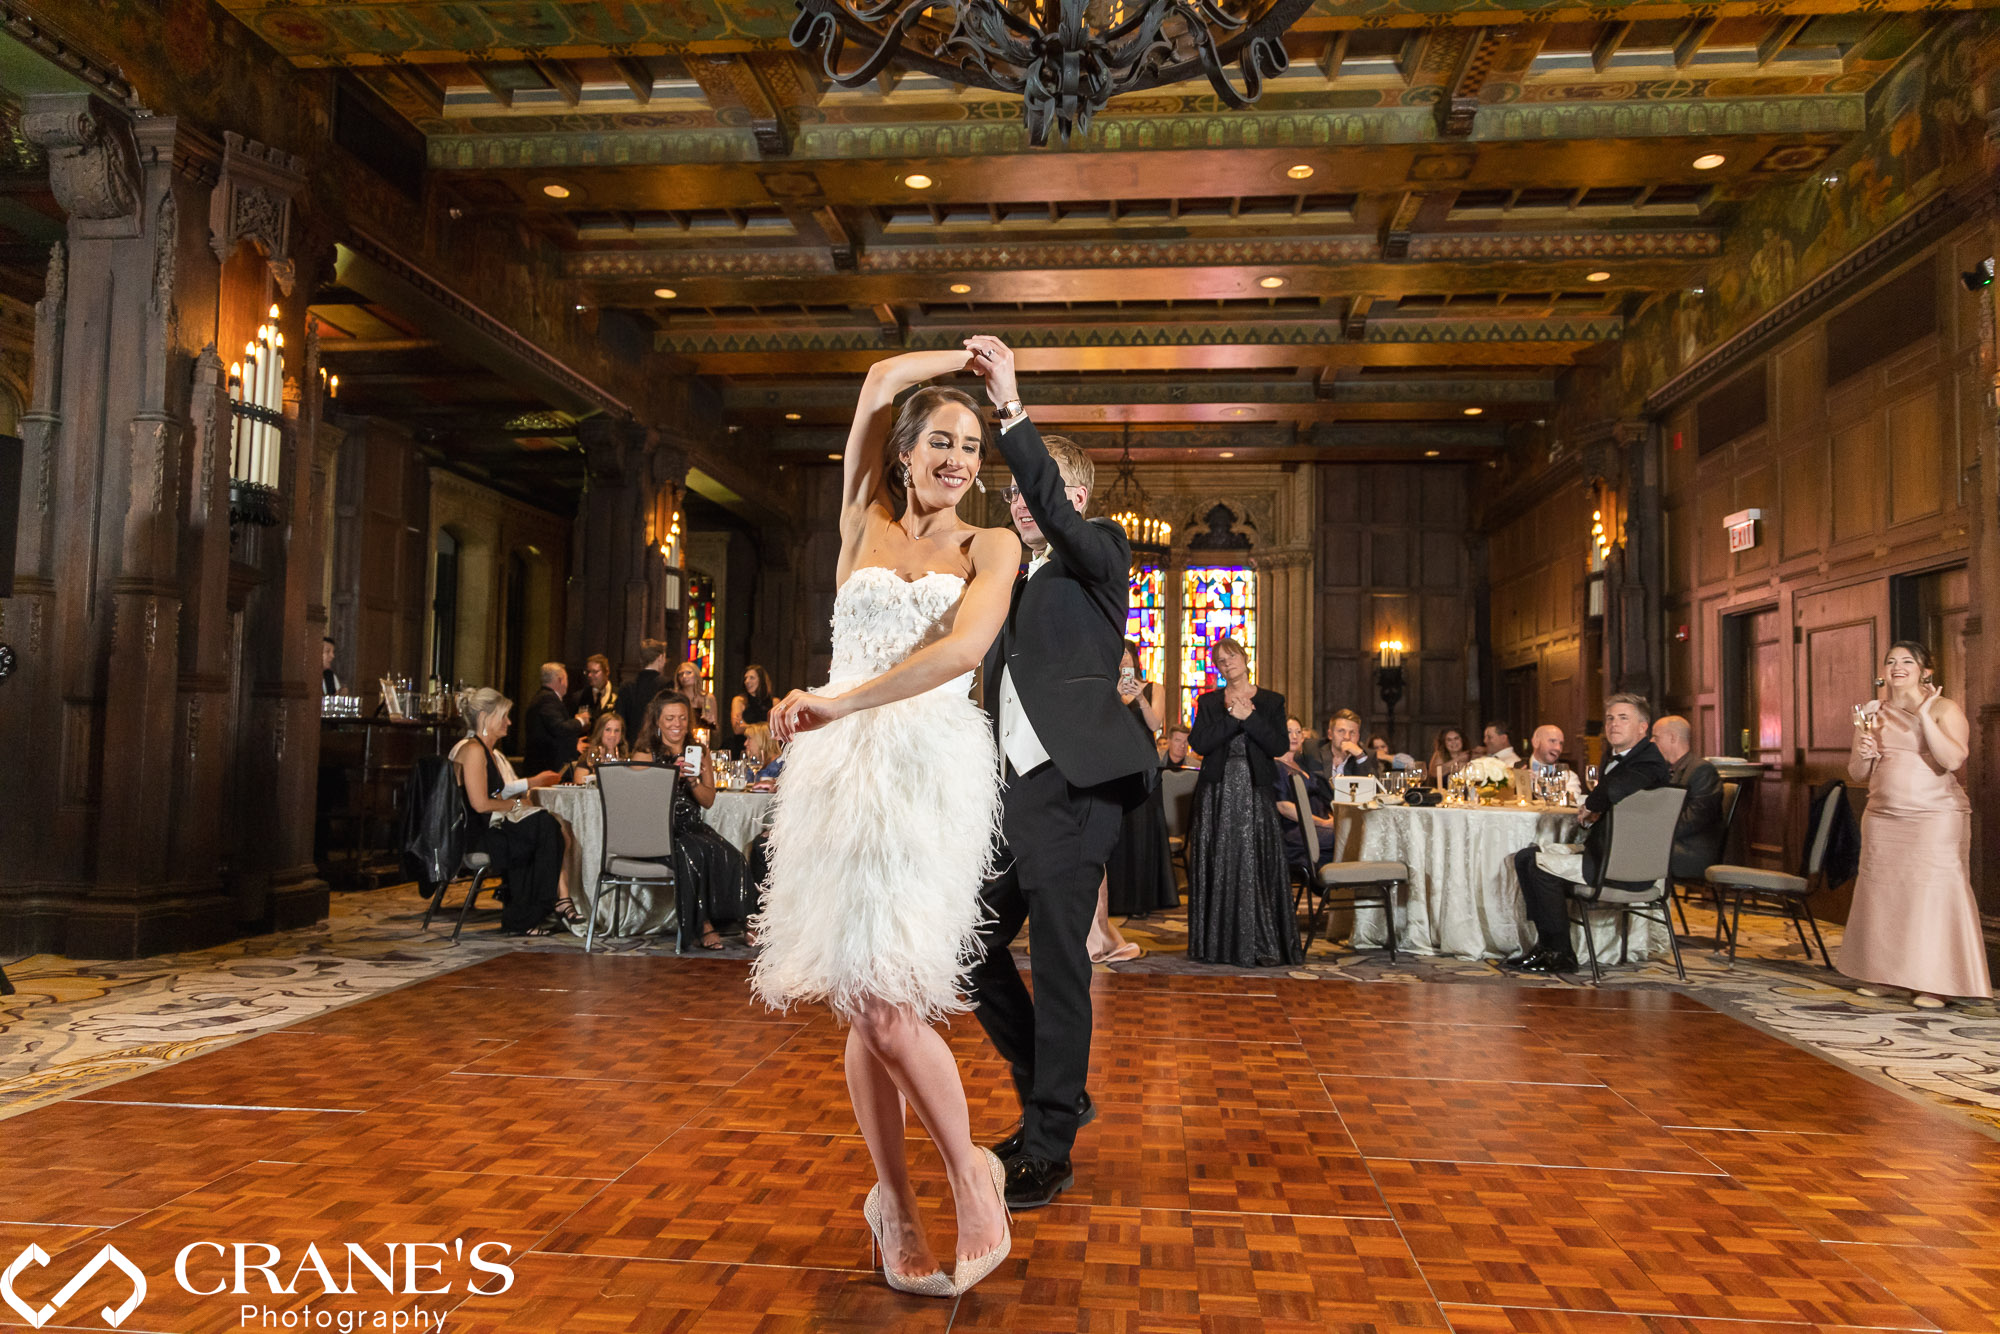 Bride and groom dancing during their wedding reception at King Arthur Court at InterContinental.